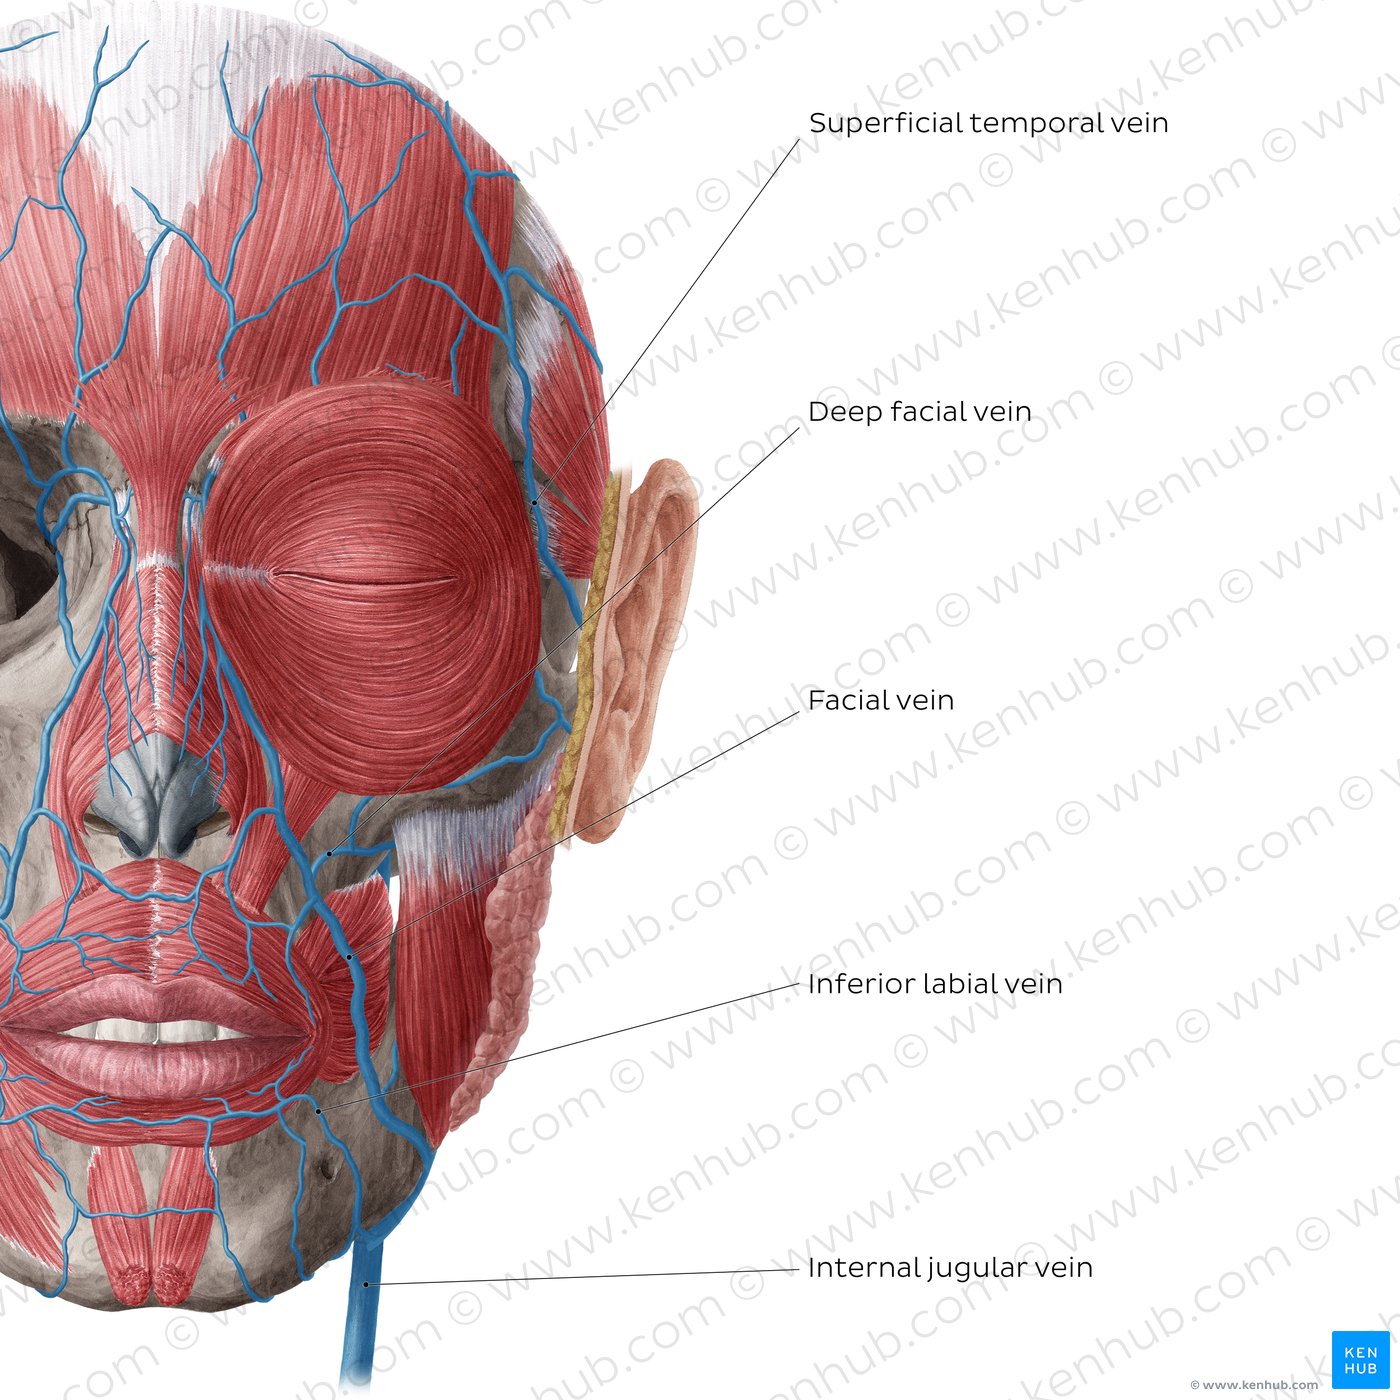 Veins of face and scalp (Anterior view: superficial)